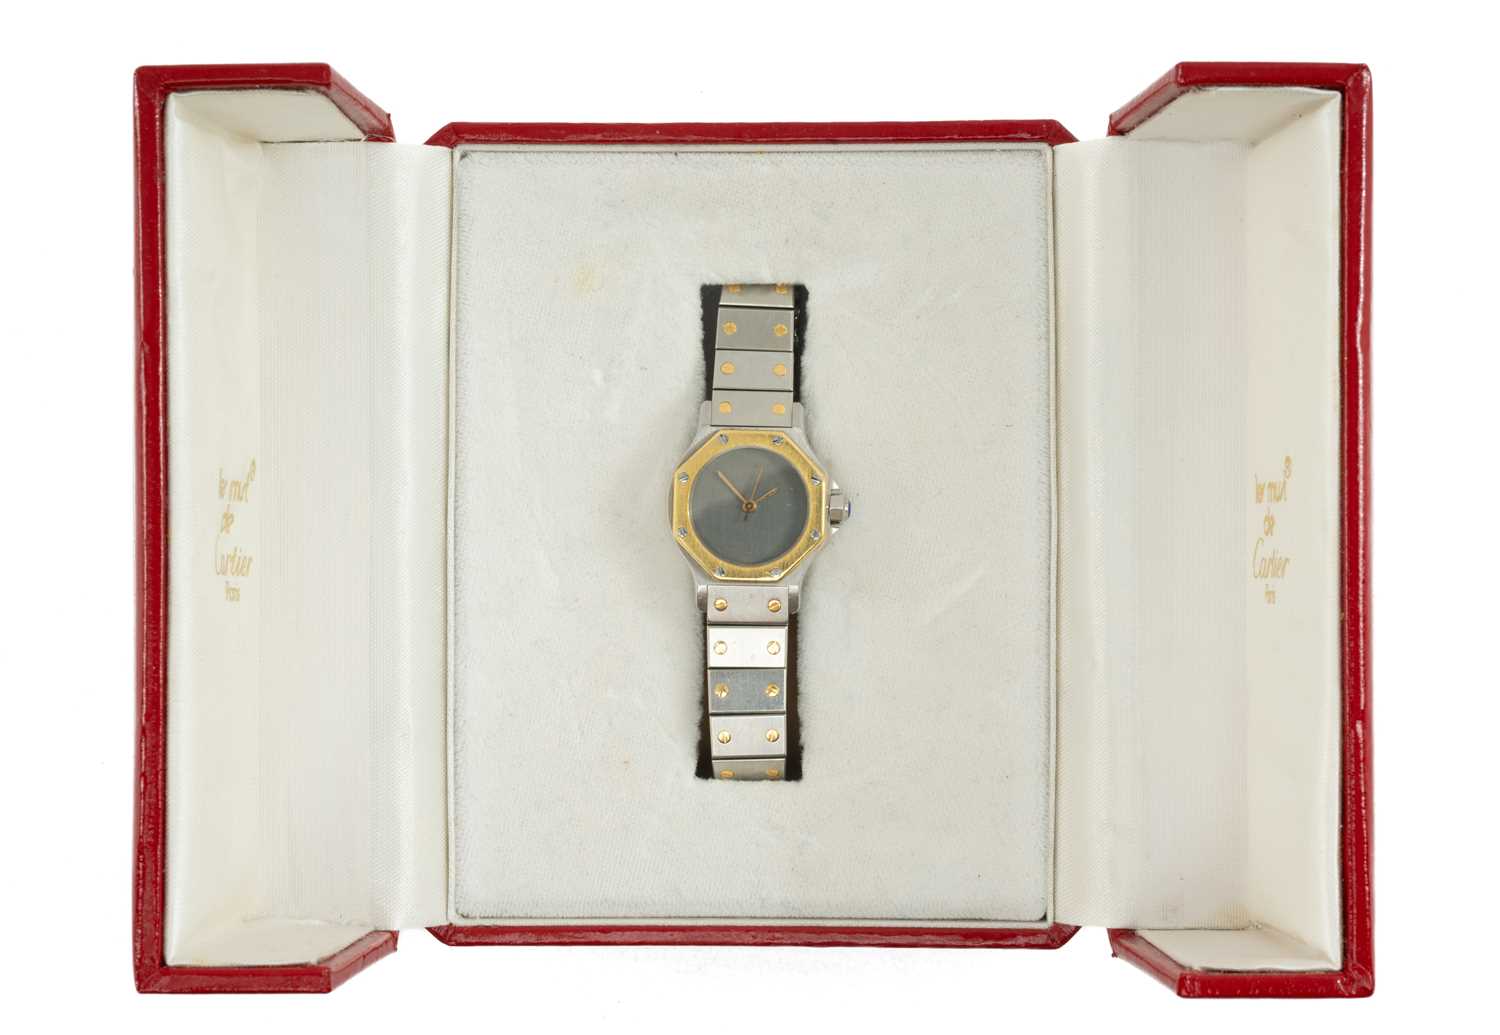 SANTOS DE CARTIER LADIES' YELLOW GOLD & STAINLESS STEEL AUTOMATIC BRACELET WATCH, Ref: 0907, slate - Image 2 of 3